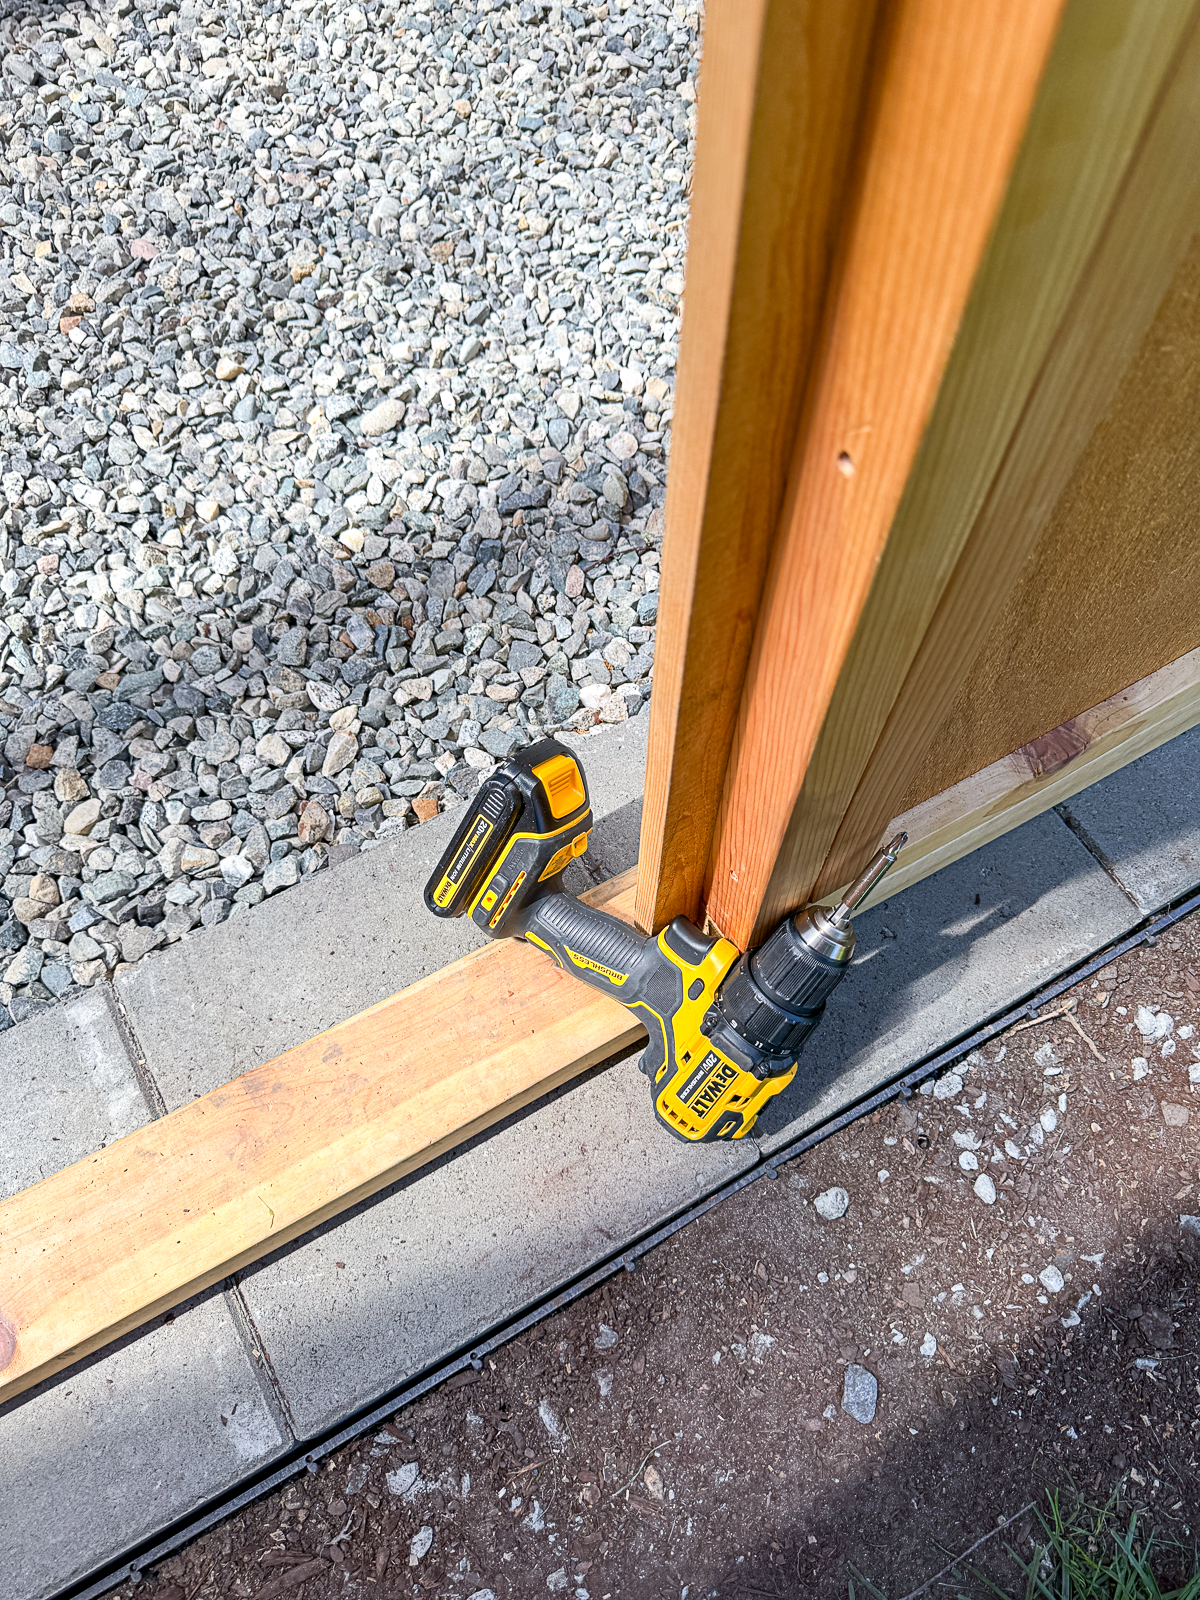 using a cordless drill as a door stop while installing the door knob